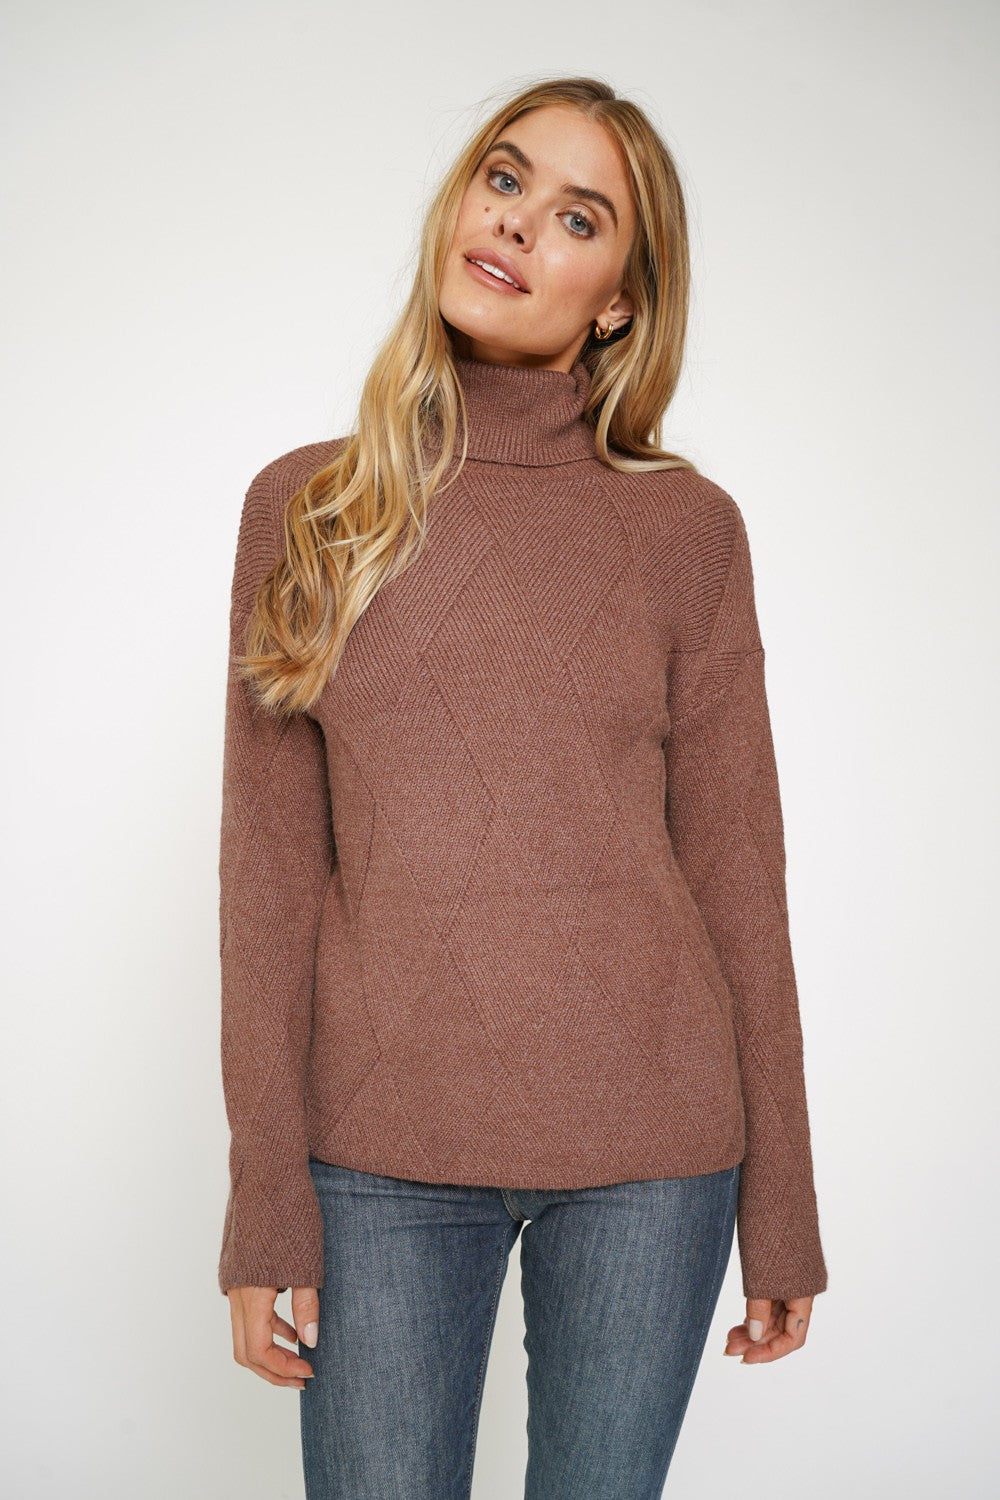 Chocolate Mousse Sweater